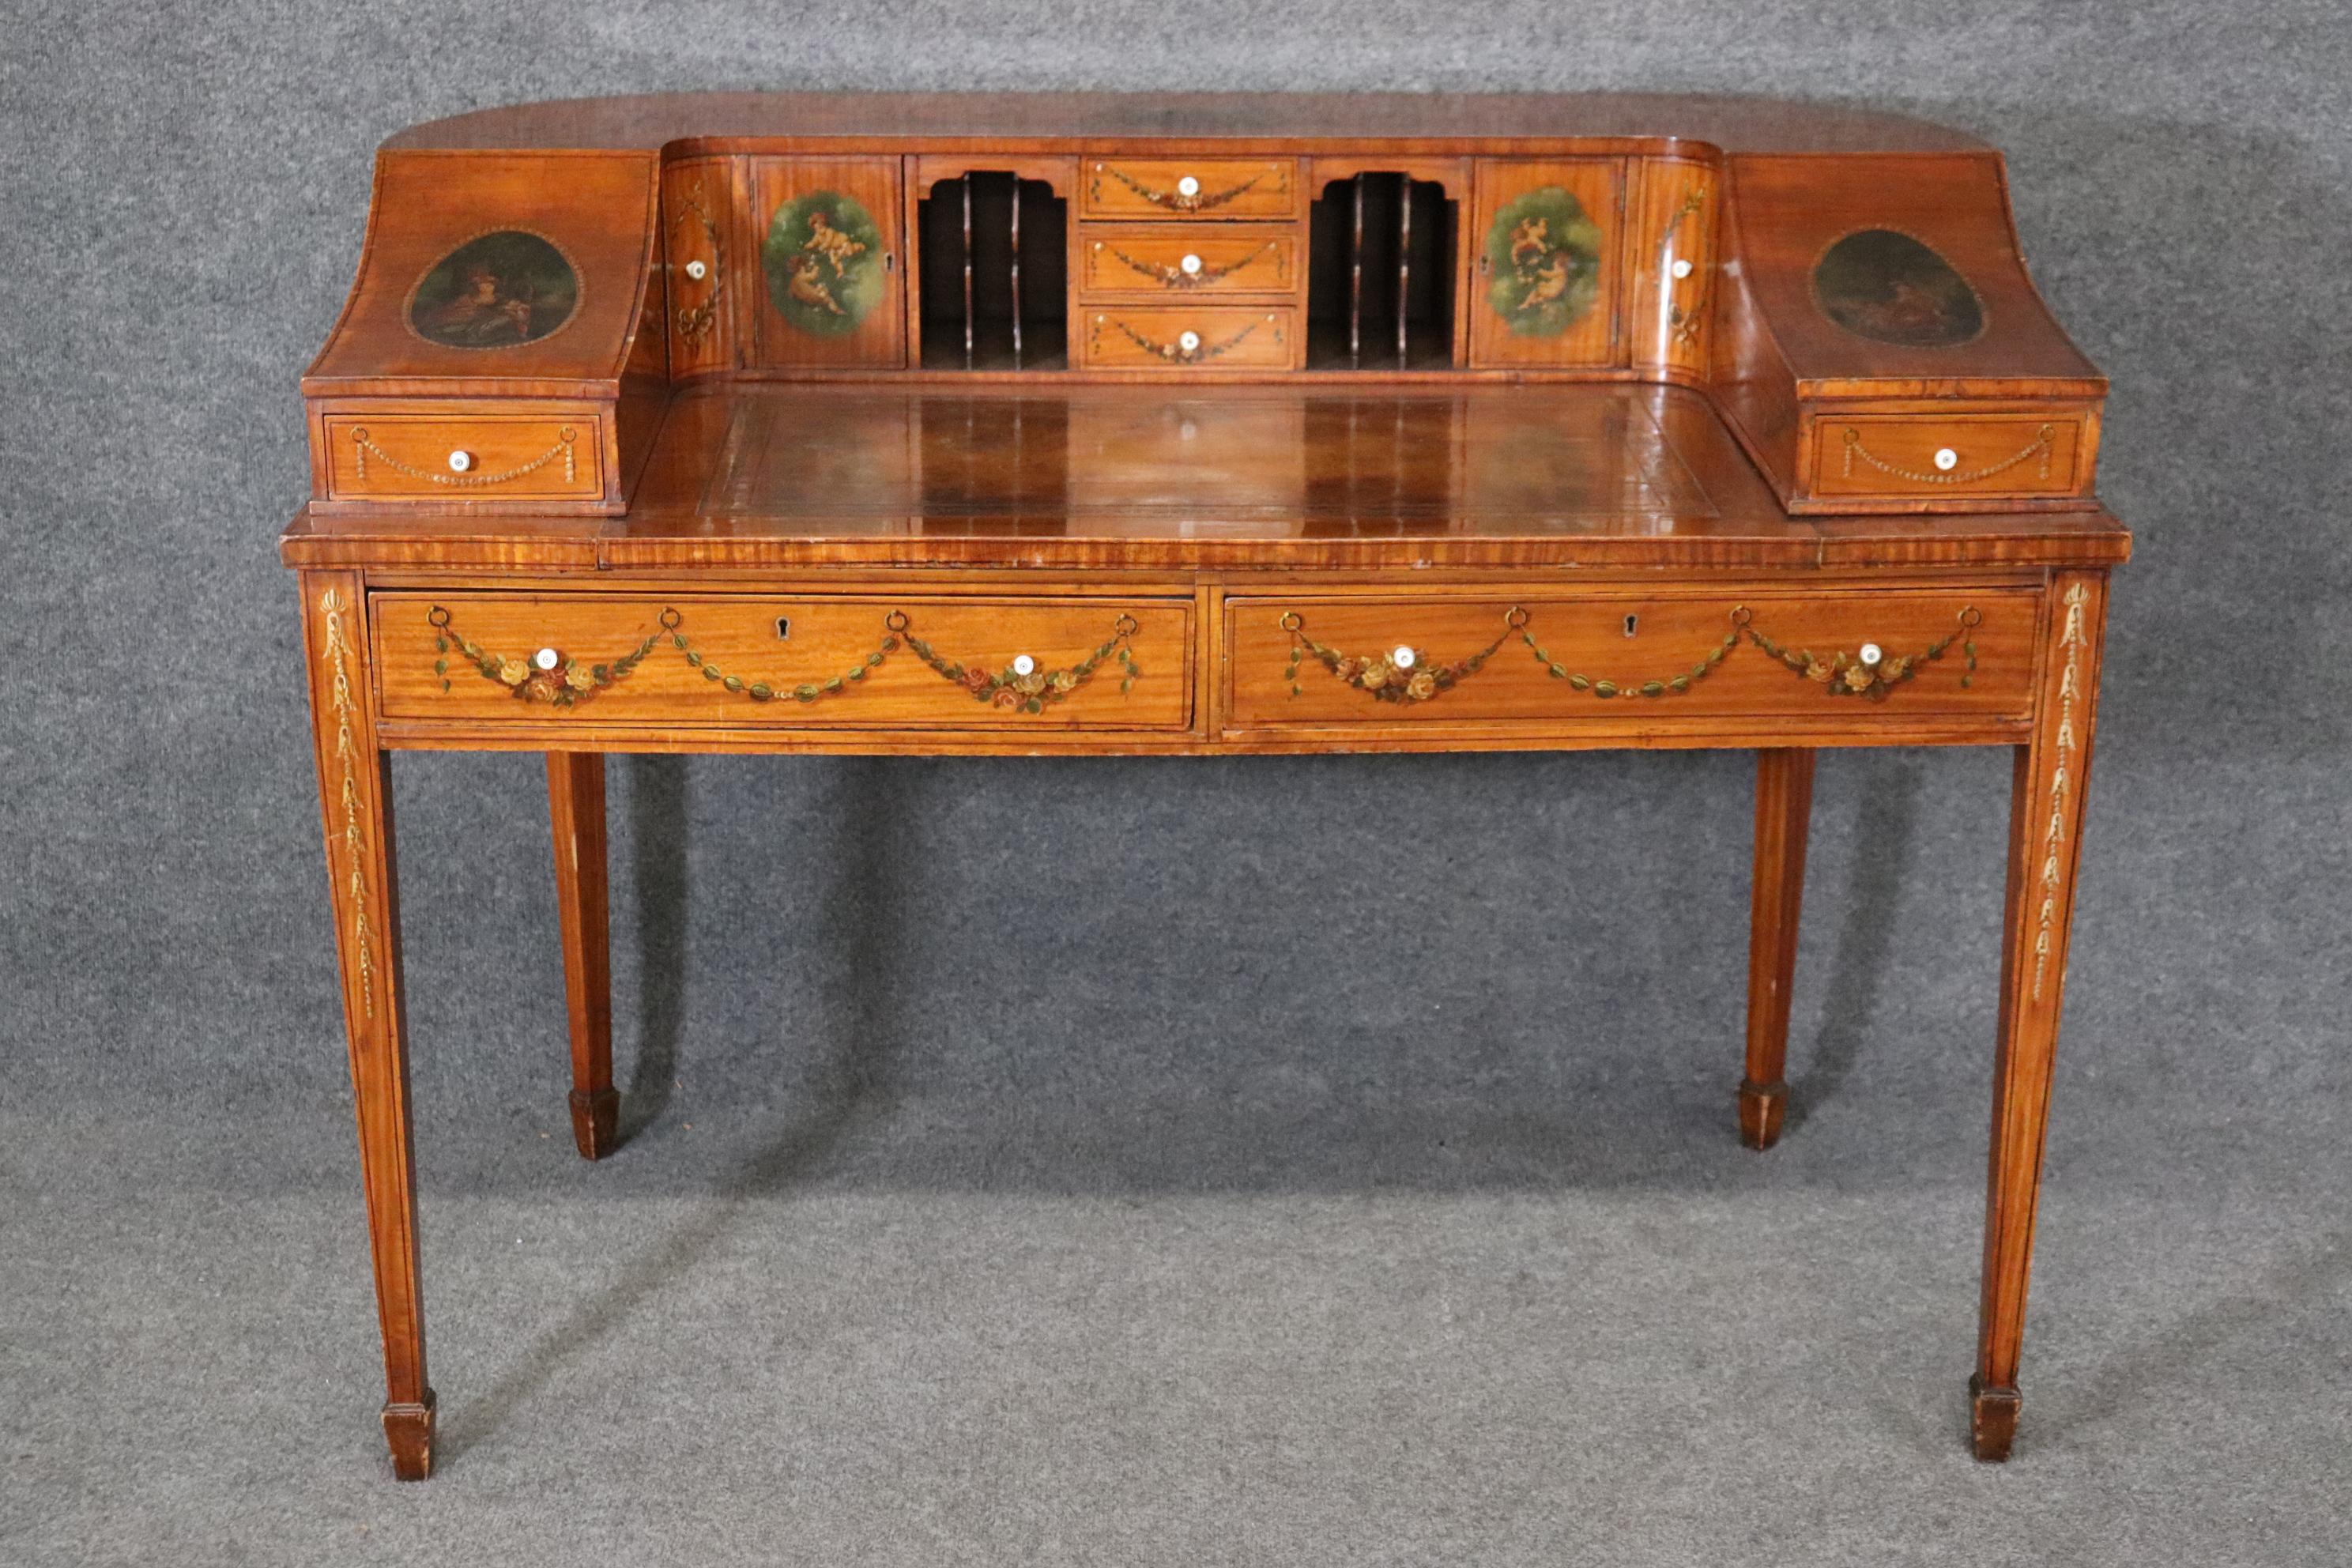 Fine Quality English Satinwood Carlton House Desk with Cherubs and Musical Theme 2